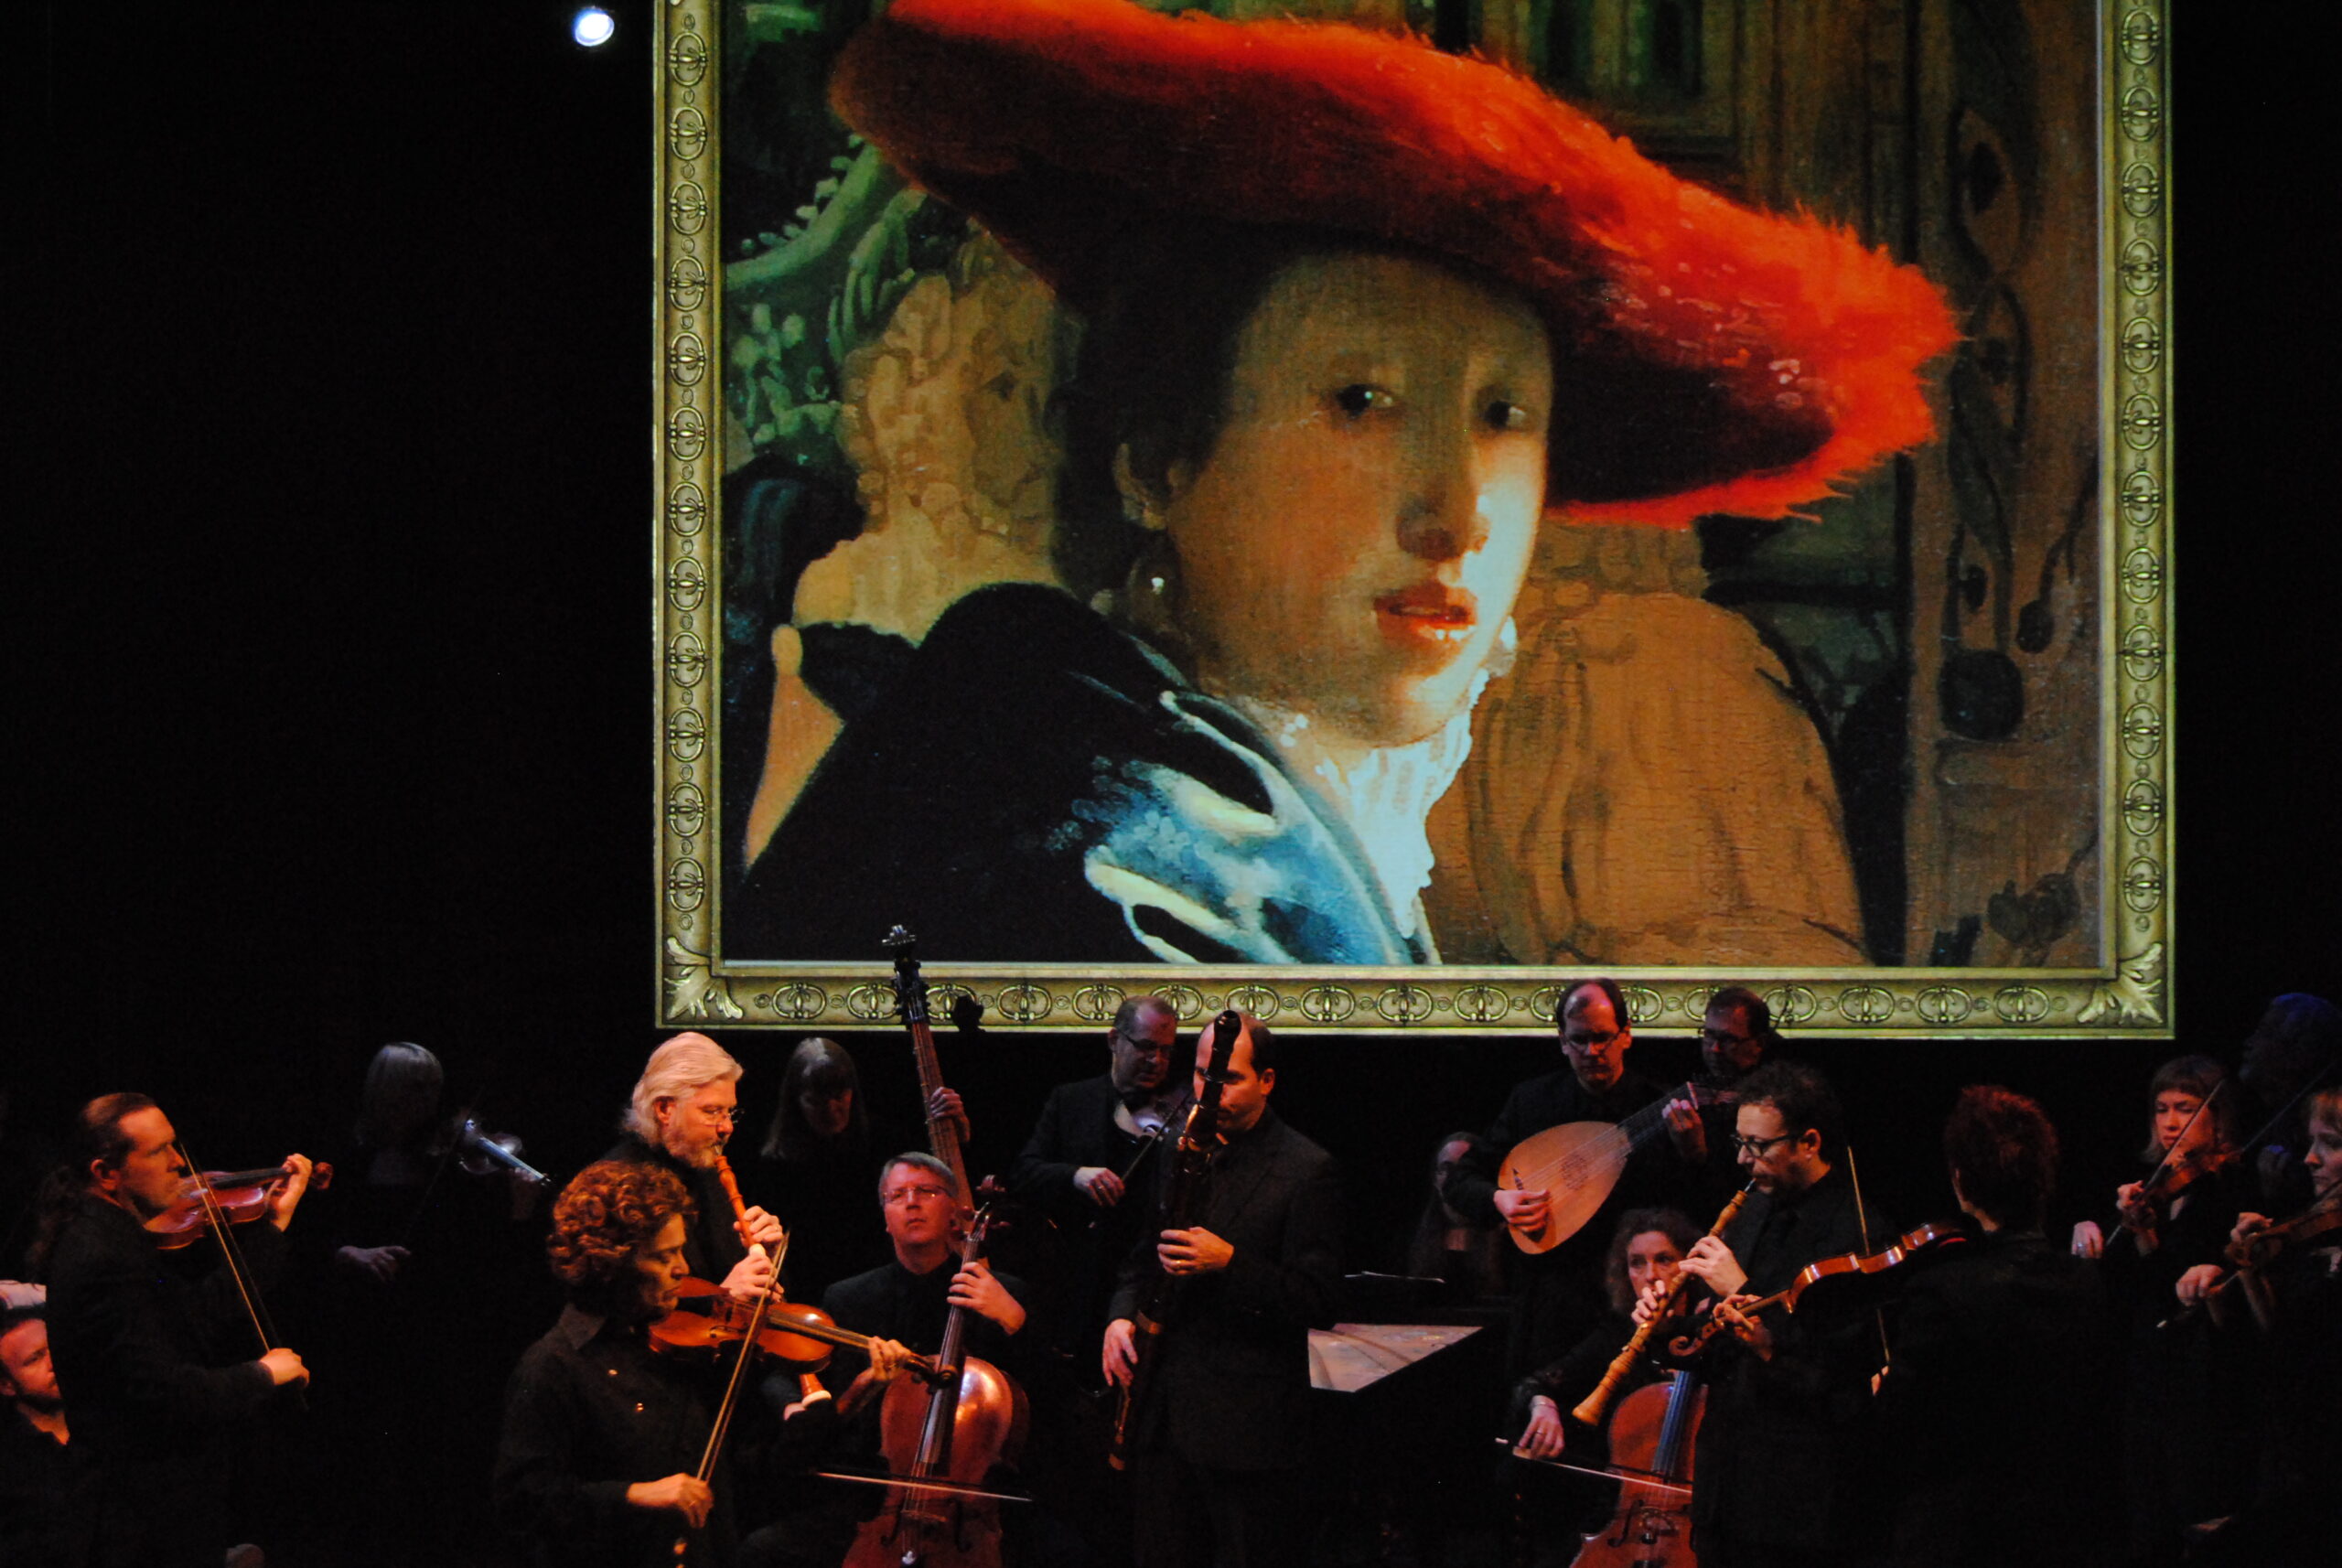 Tafelmusik with Vermeer, Girl with a red hat